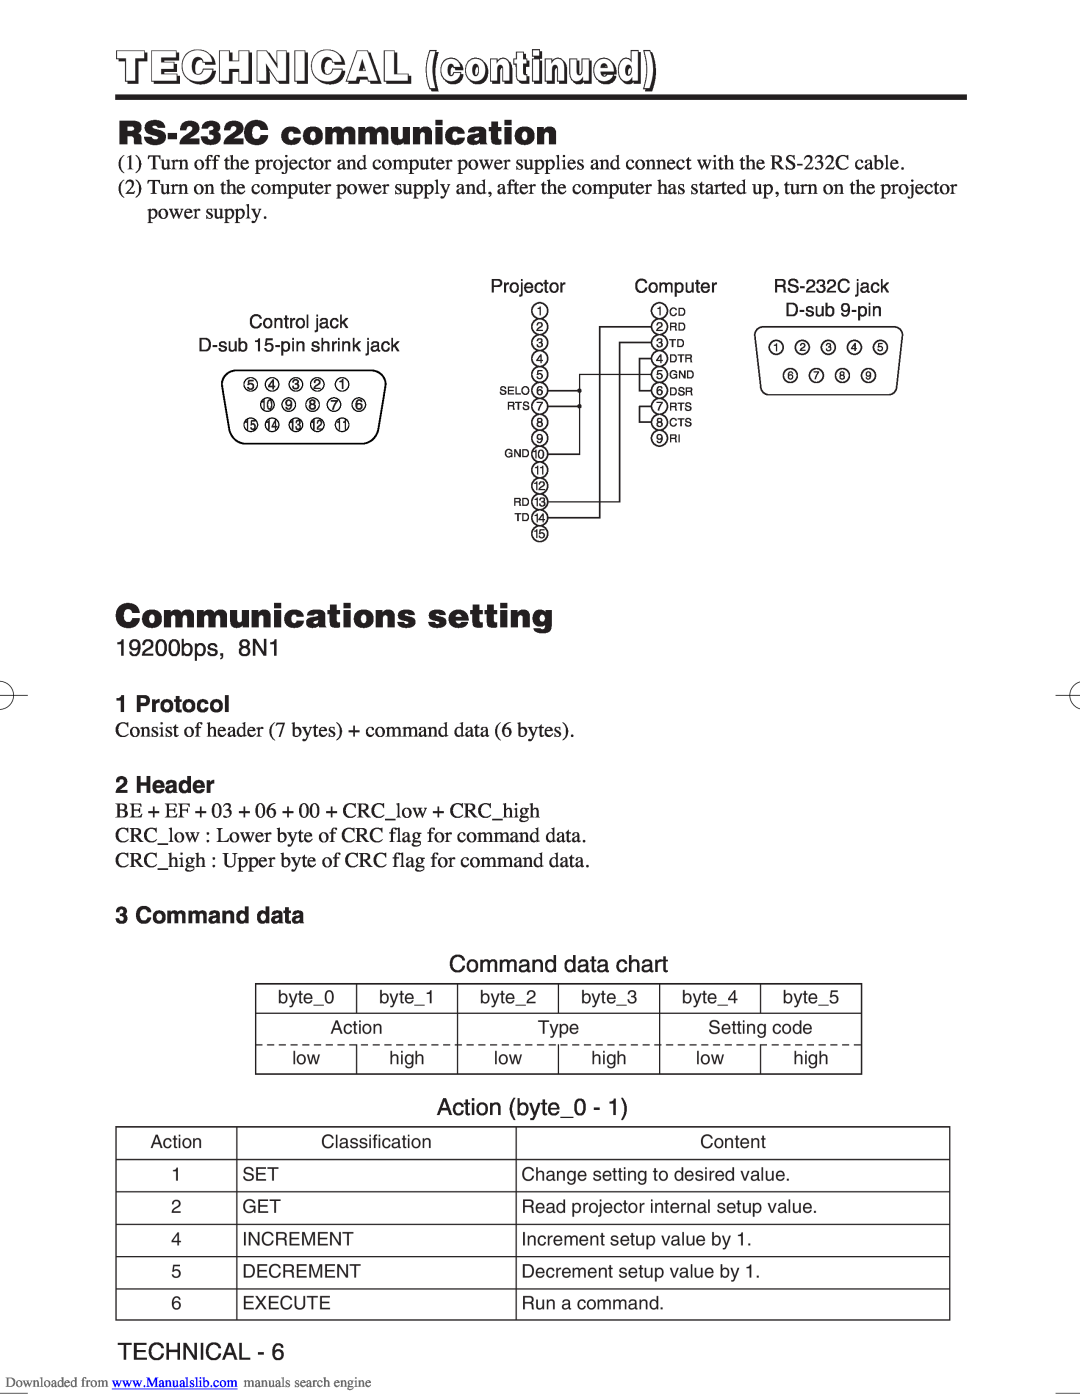 Hitachi CP-S370W RS-232C communication, Communications setting, Protocol, Header, Command data, TECHNICAL continued 